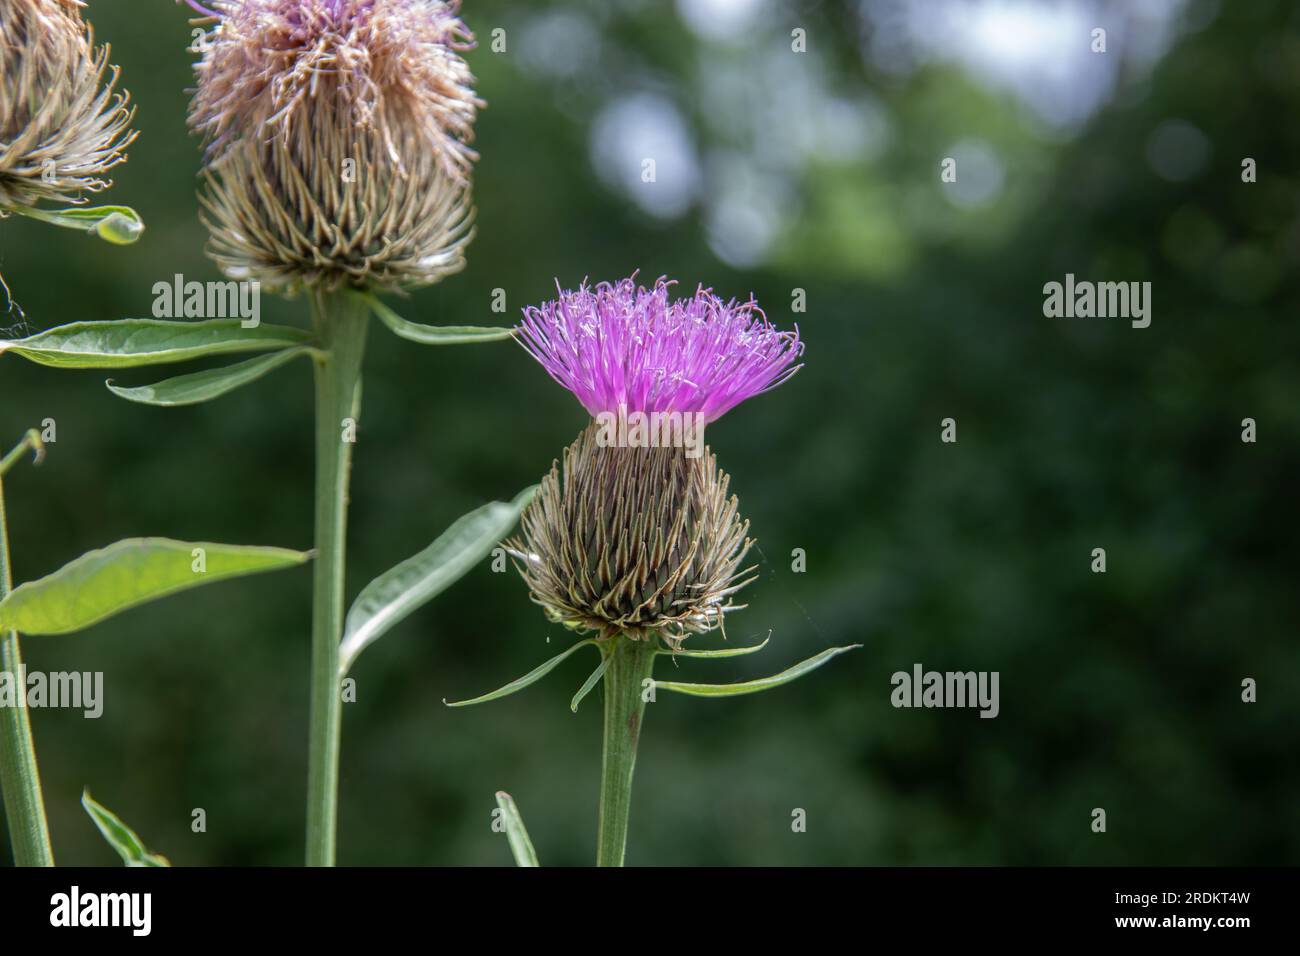 Thistles with purple flowers in summer Stock Photo